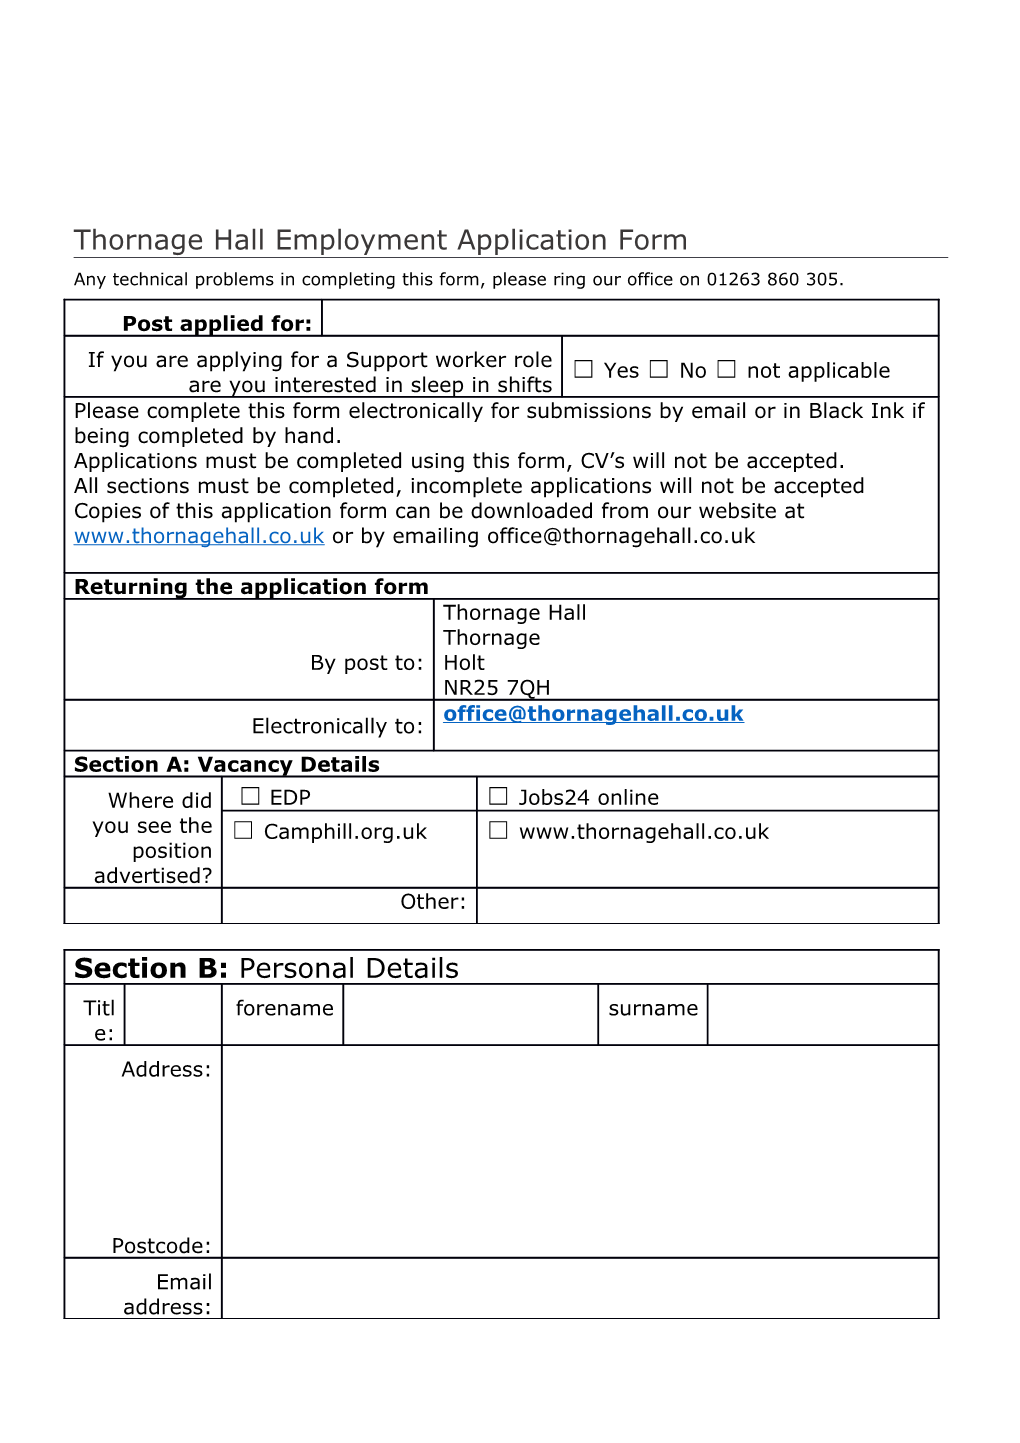 Thornage Hall Employment Application Form